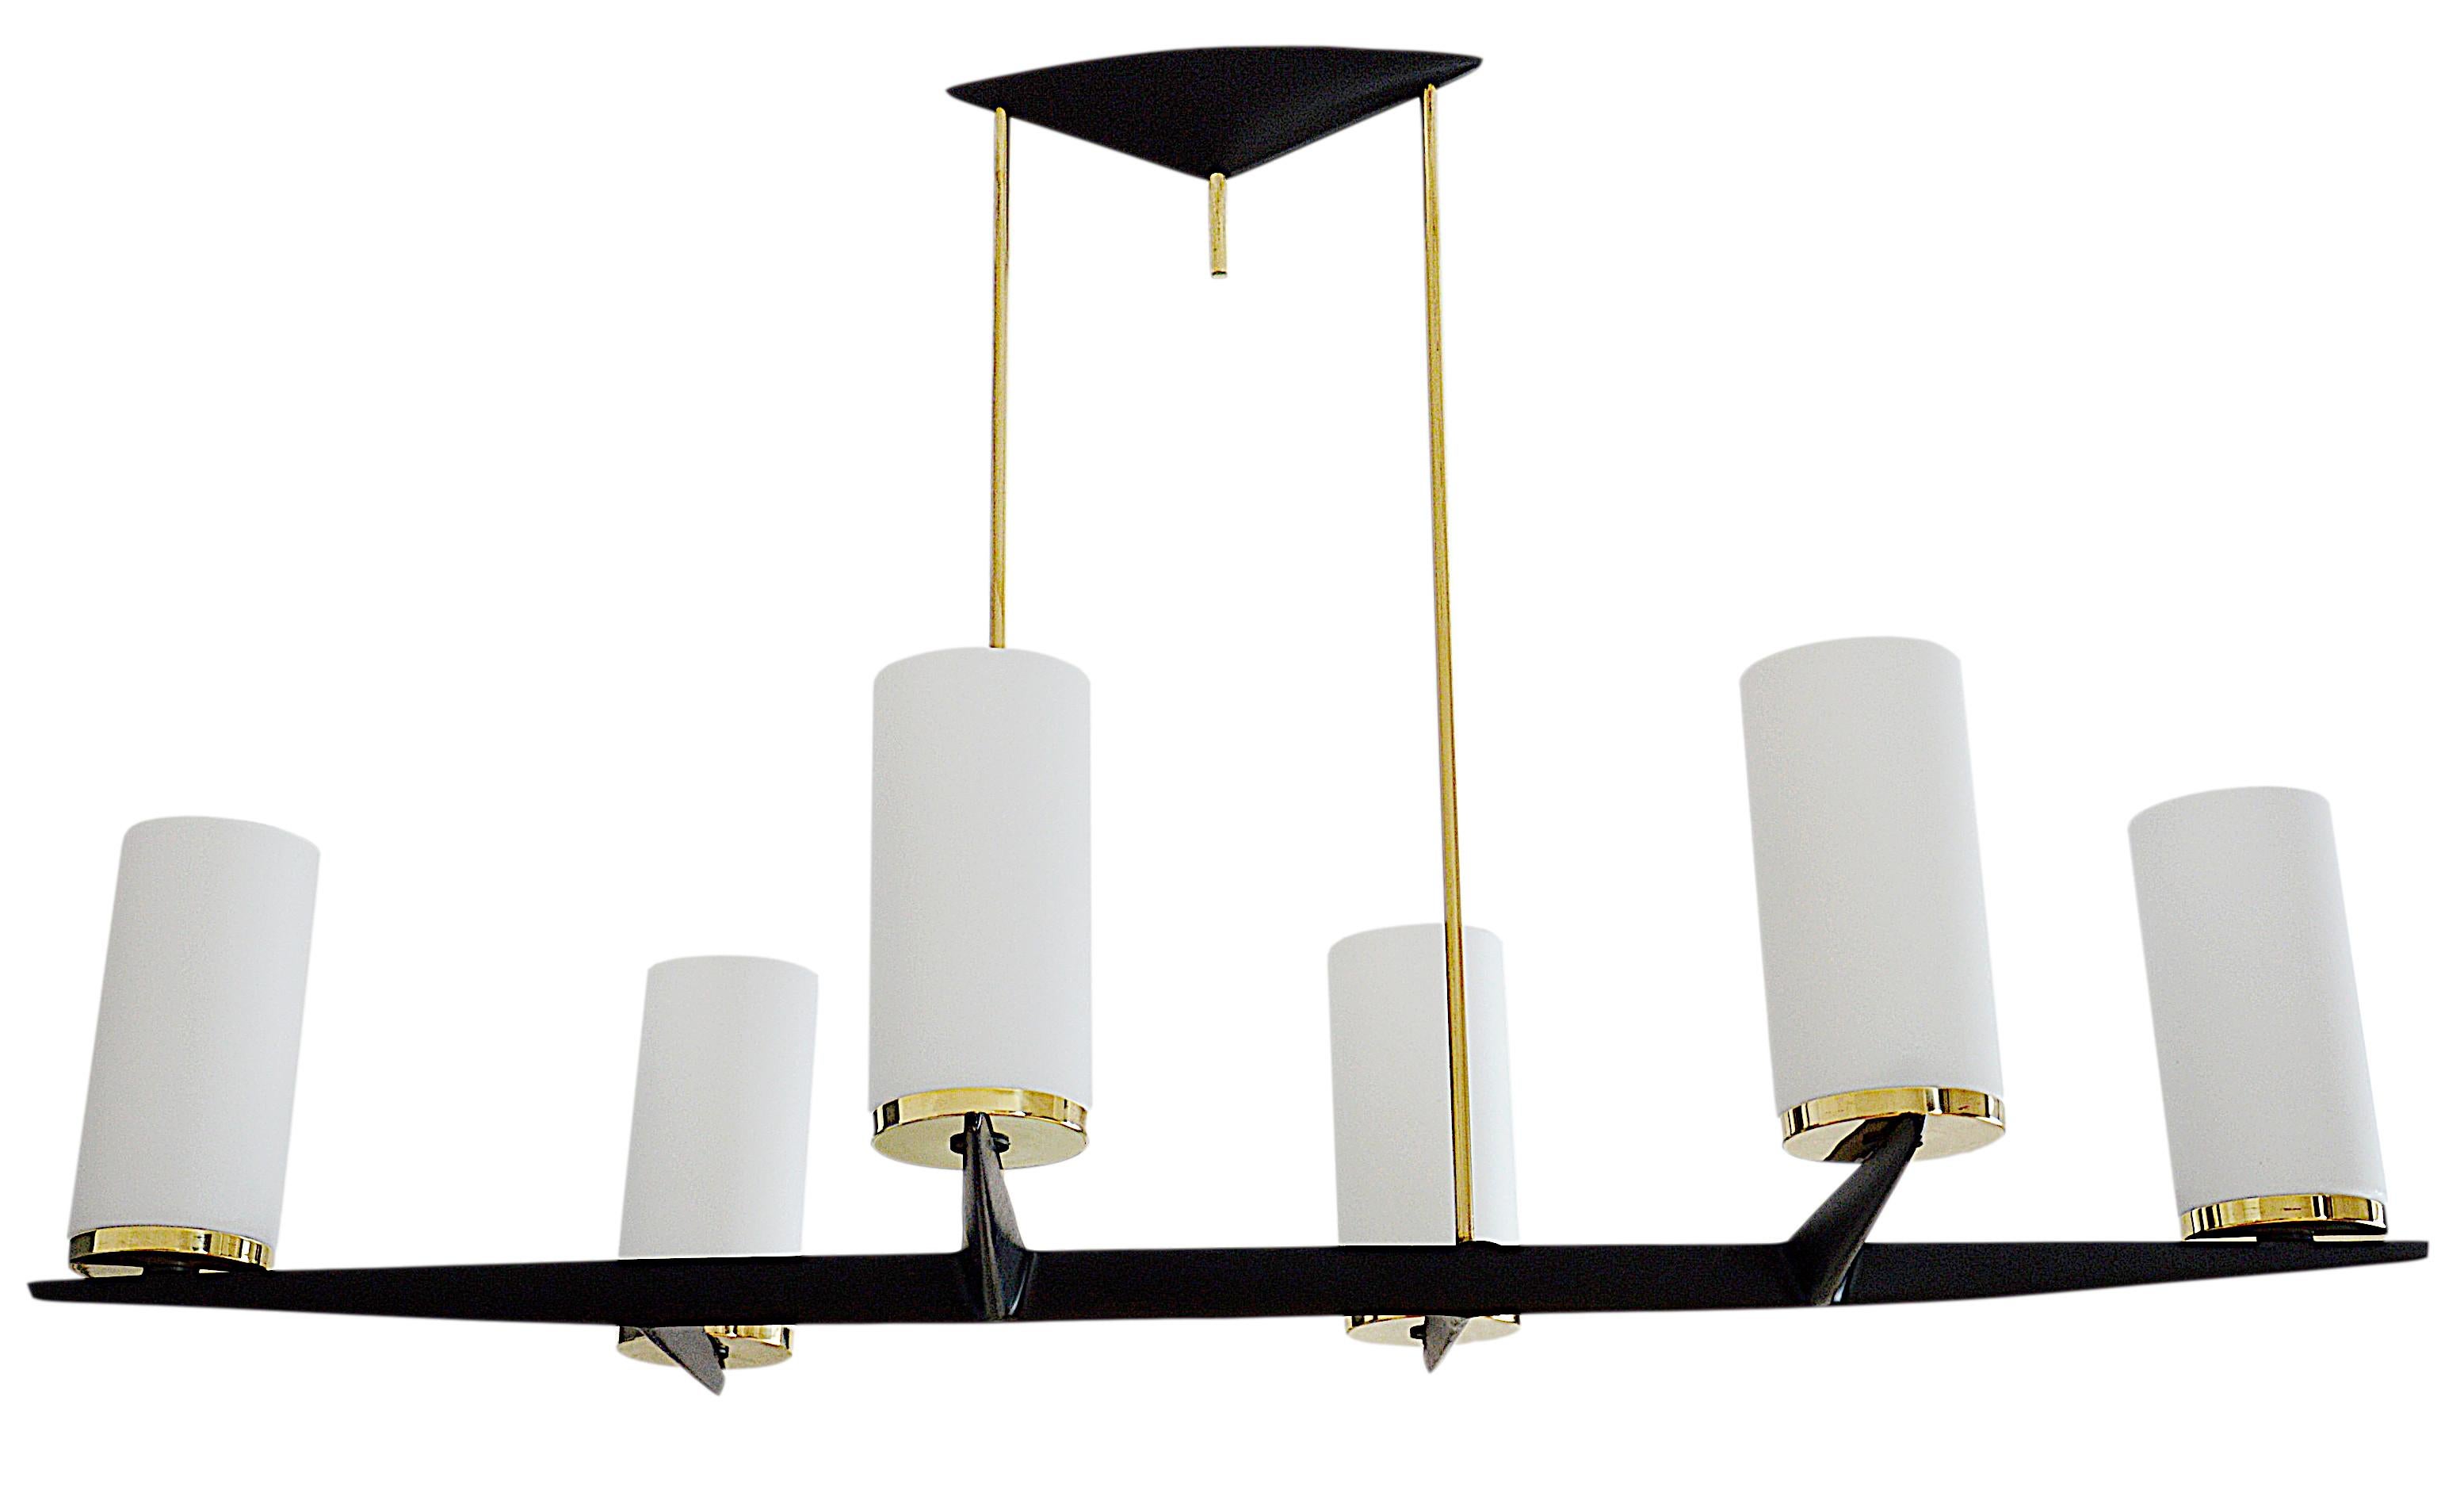 French midcentury chandelier by Arlus (Paris), France, 1950s. 6 white glass shades. Brass and painted black metal. Can be combined with wall lights that we have of the same model. Measures: Height 23.2